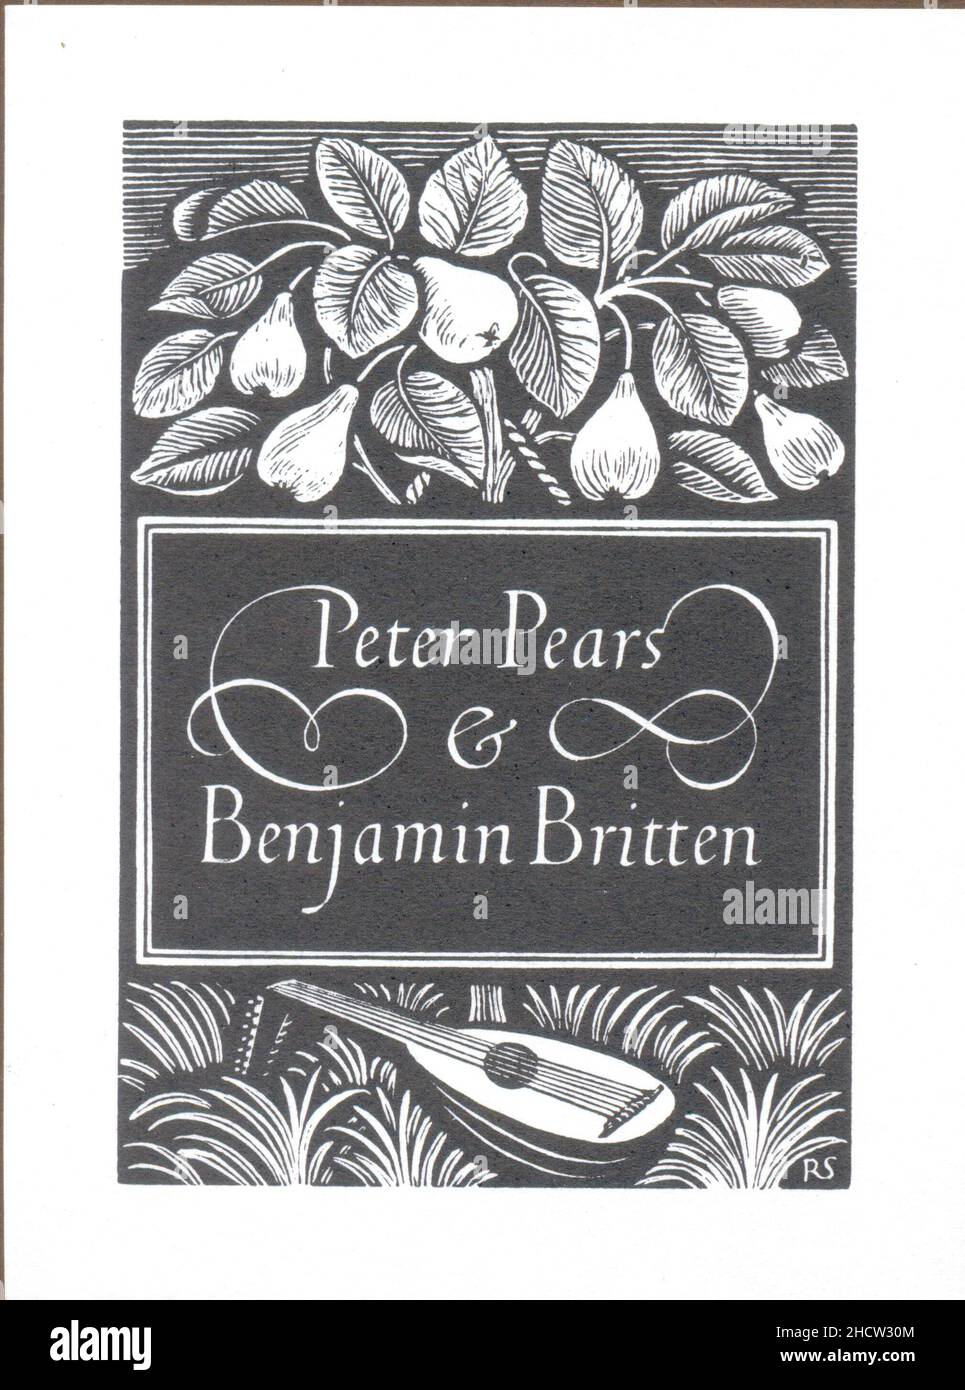 Ex lilbris (bookplate) for Peter Pears and Benjamin Britten engraved by Reynolds Stone Stock Photo